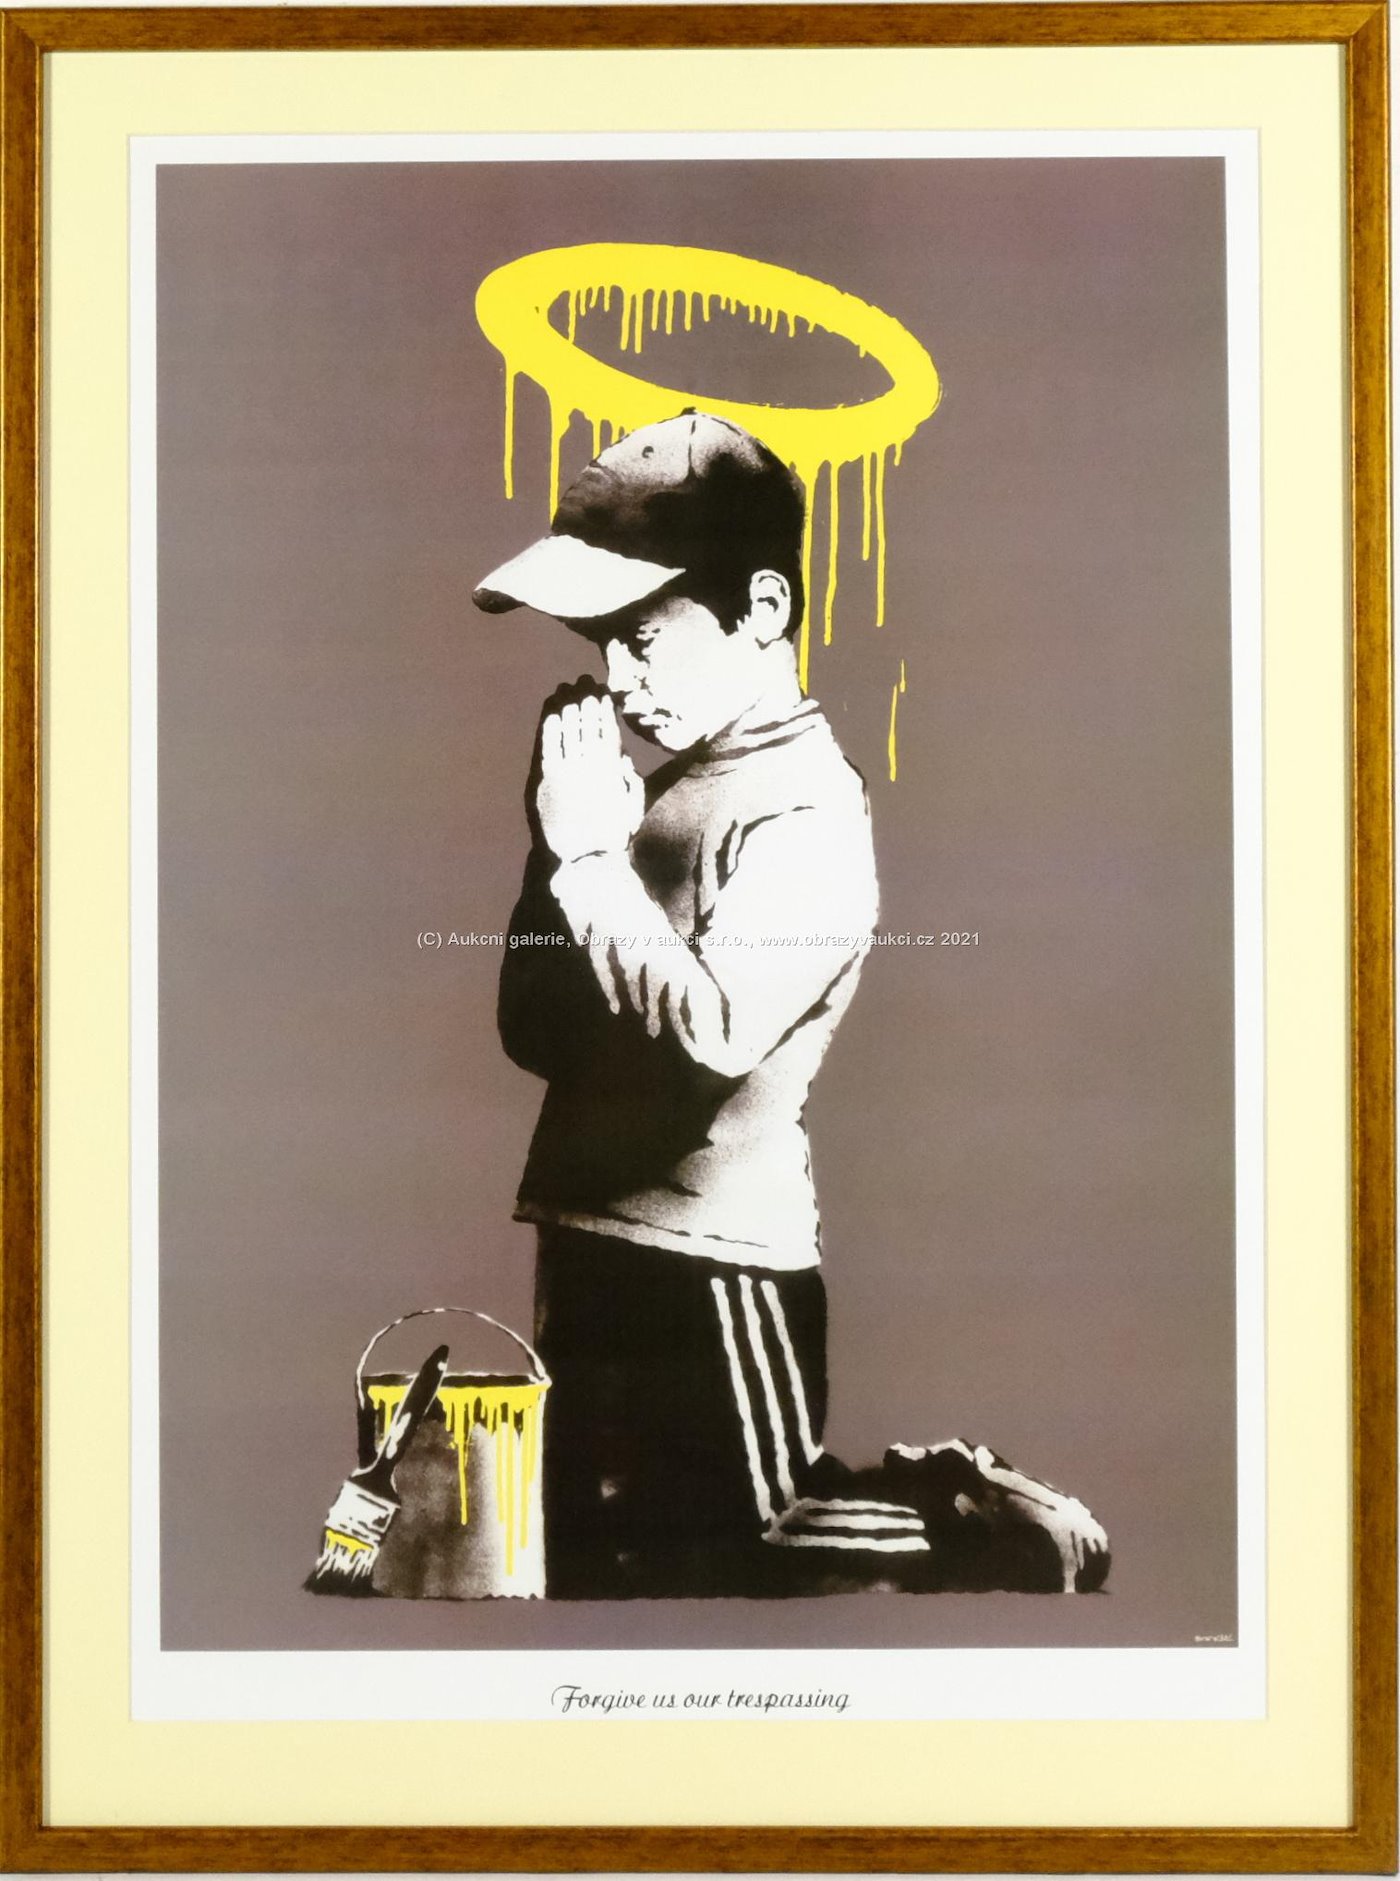 Banksy - Forgive us our trespassing